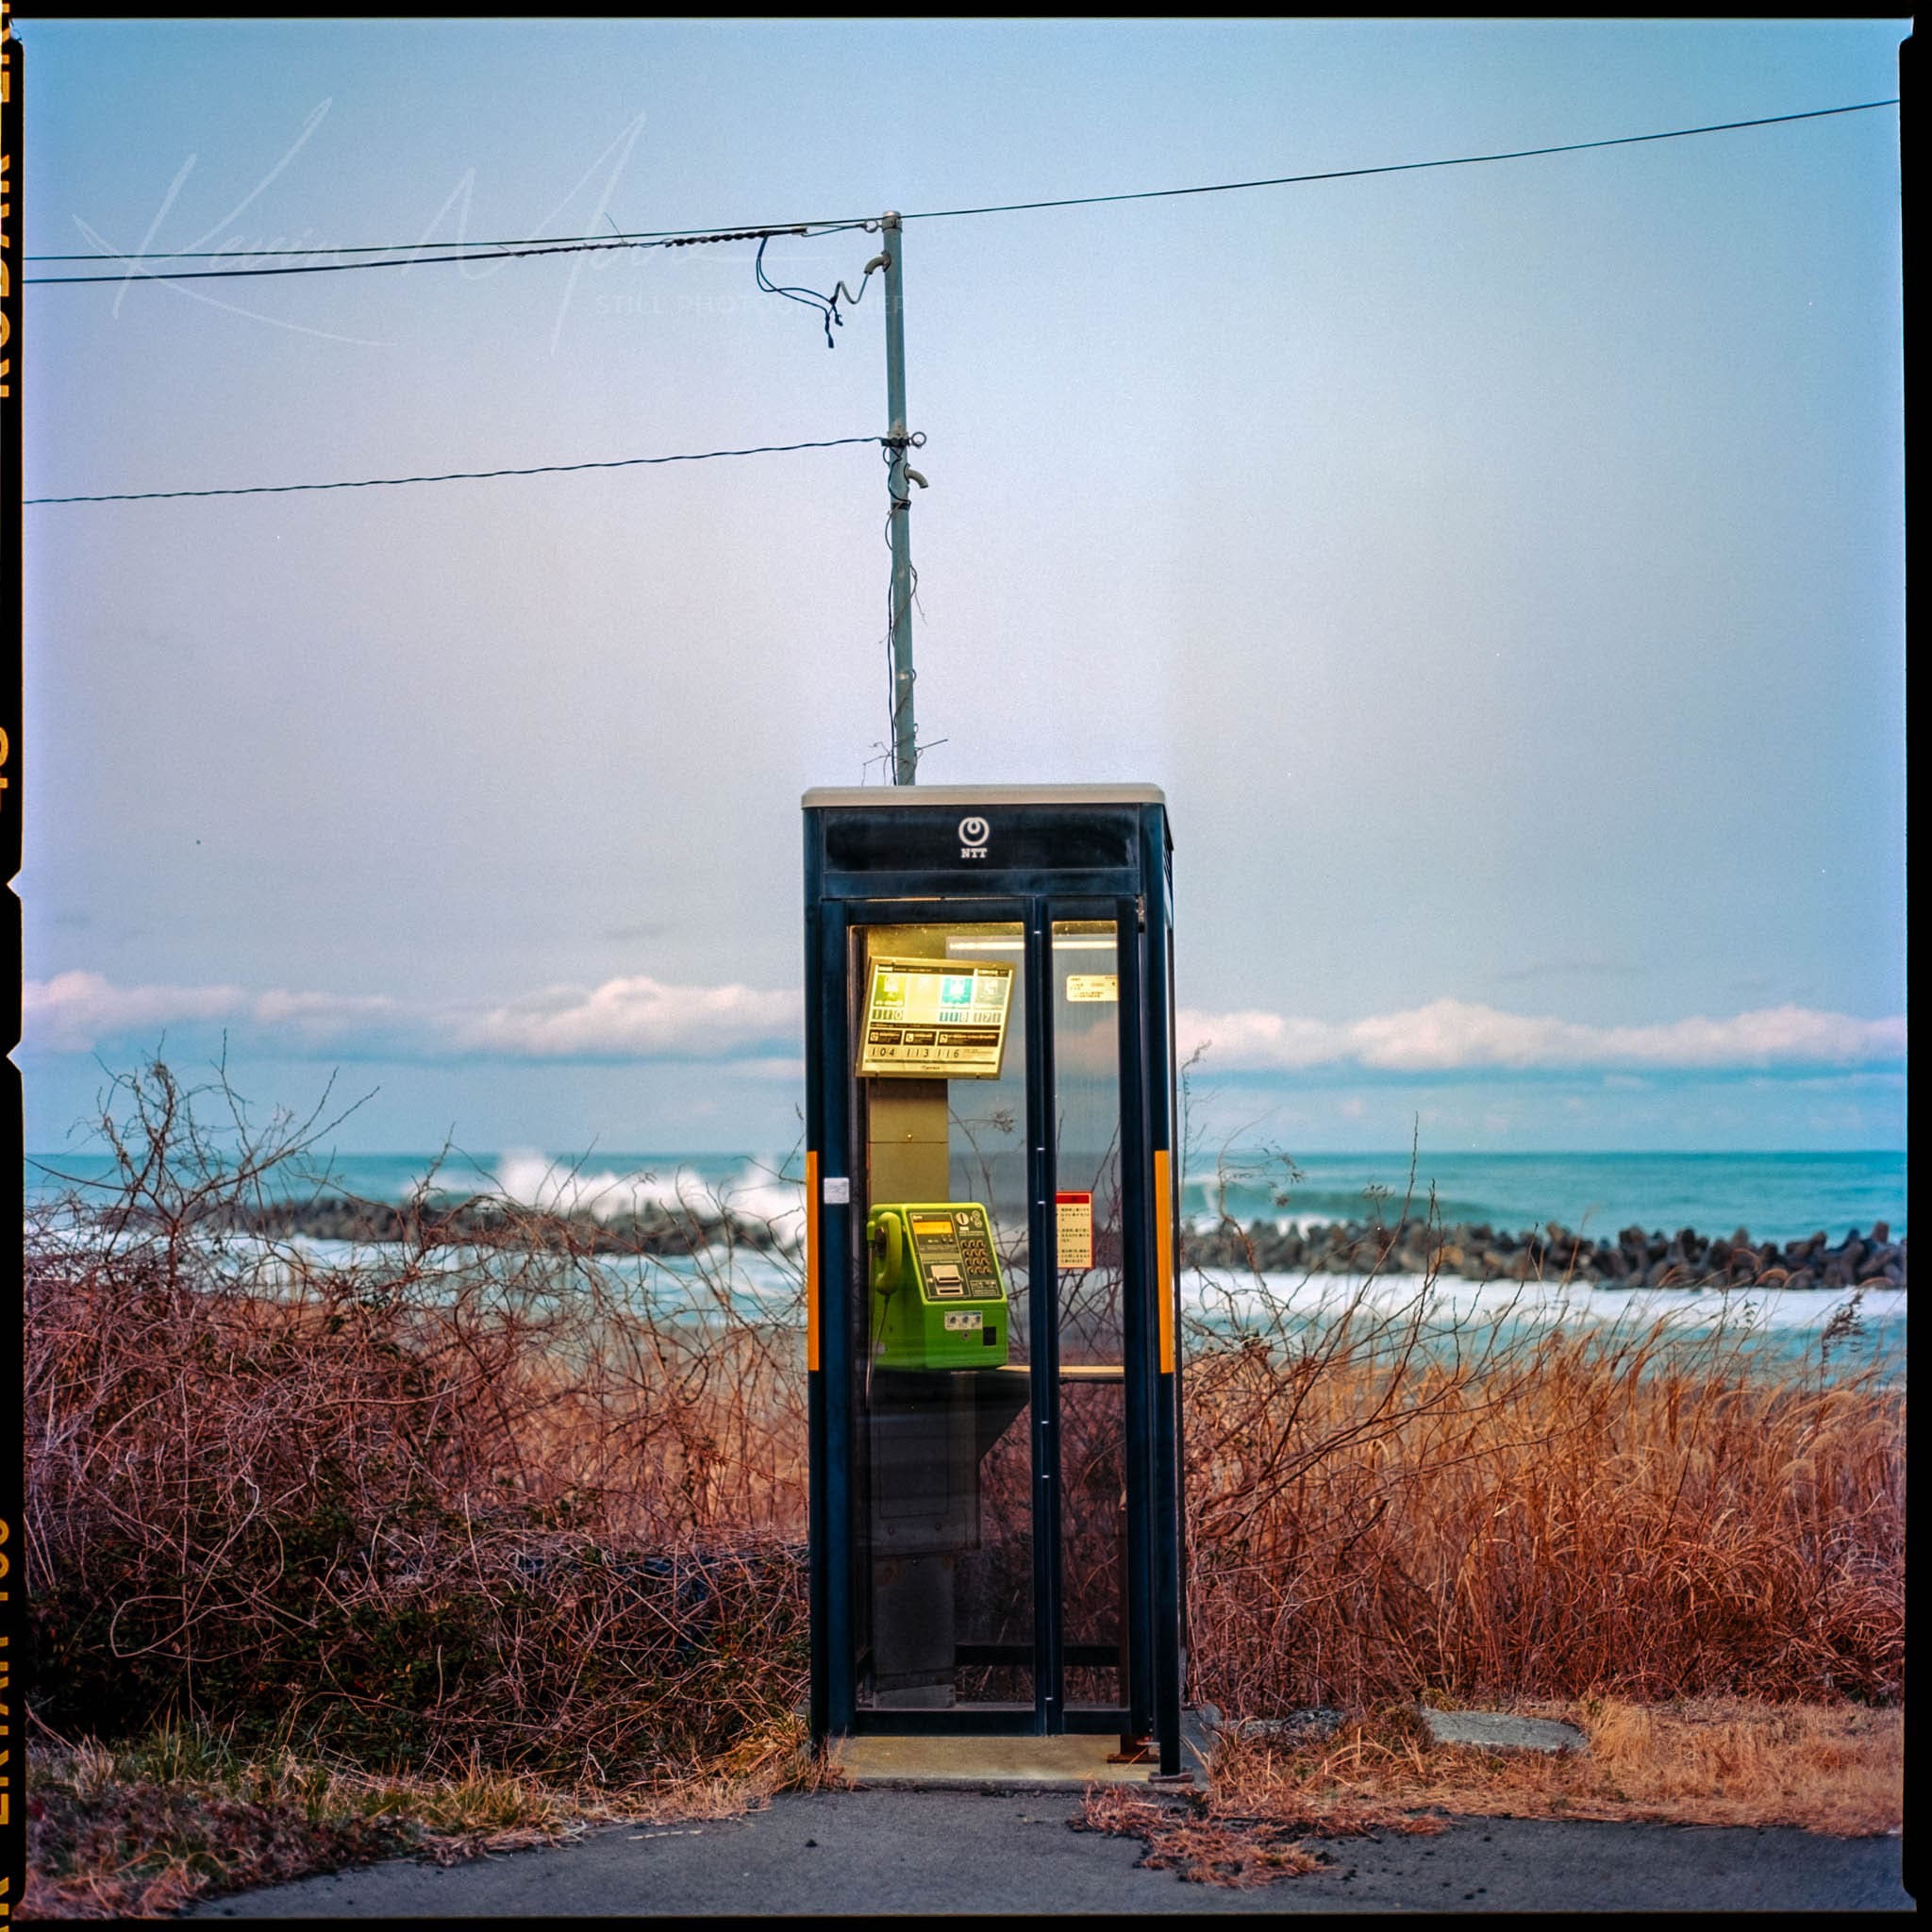 Vintage phone booth in tranquil wilderness with distant hills and power lines overhead.